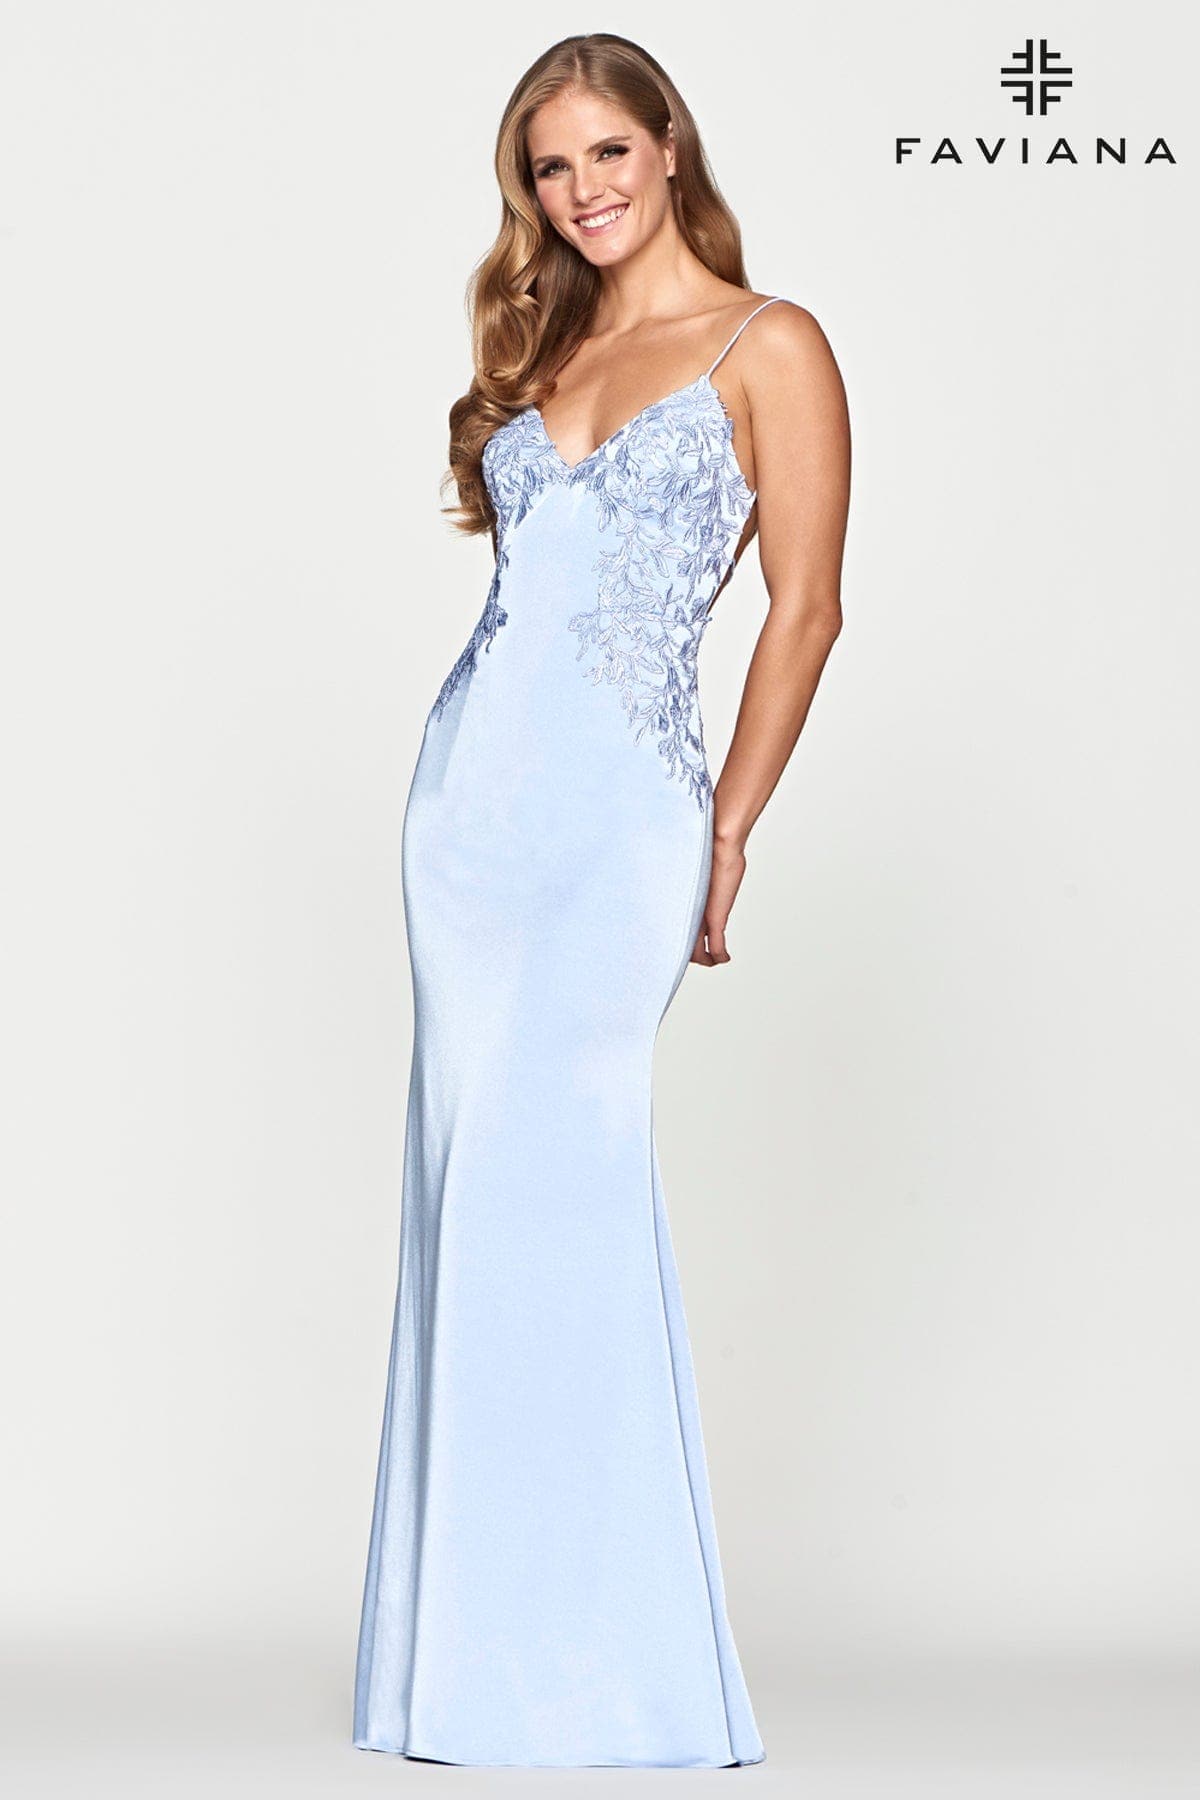 Lace Applique V Neck Prom Dress With Lace Up Back | Faviana